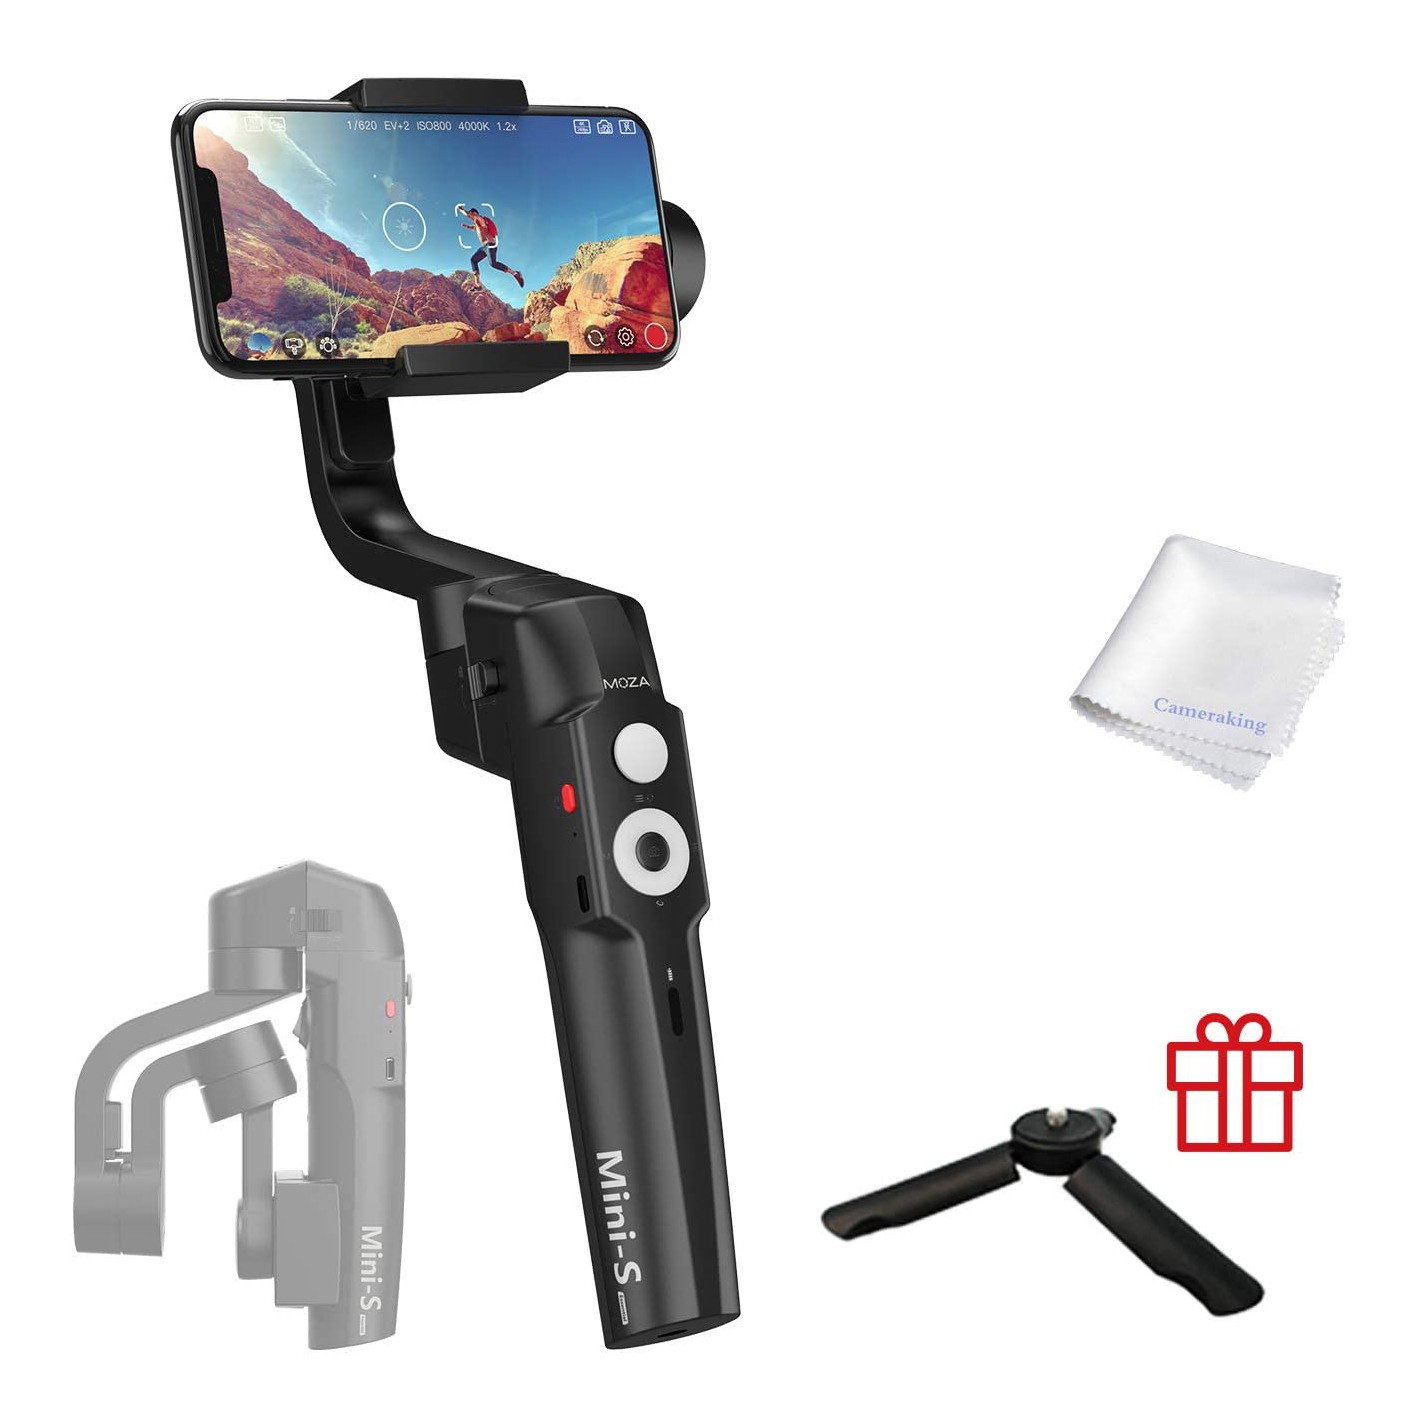 MOZA Mini-S Essential Foldable Gimbal stabilizer for Smartphone Timelapse Object Tracking Zoom Vertigo Inception 3-Axis Video Stabilizer for iPhone Xs/Max/Xr/X/11 Pro Max Samsung Note 9/S9 Huawei